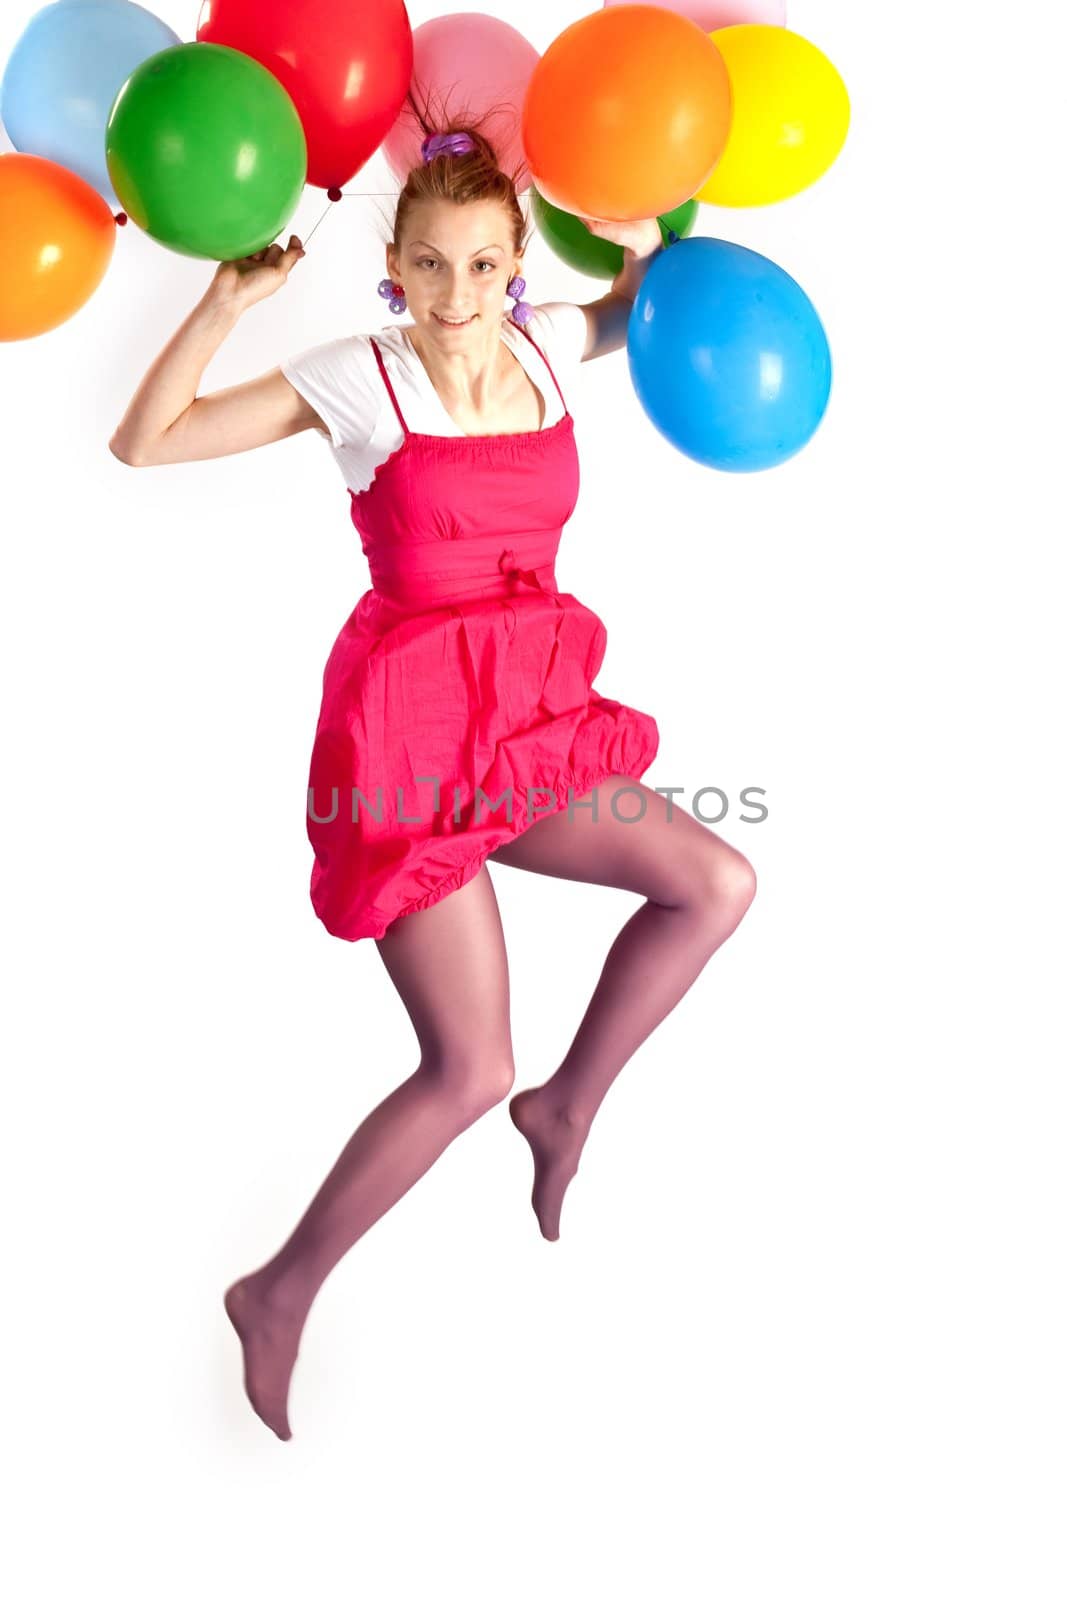 people series:  young girl jumping with multicolored balloons